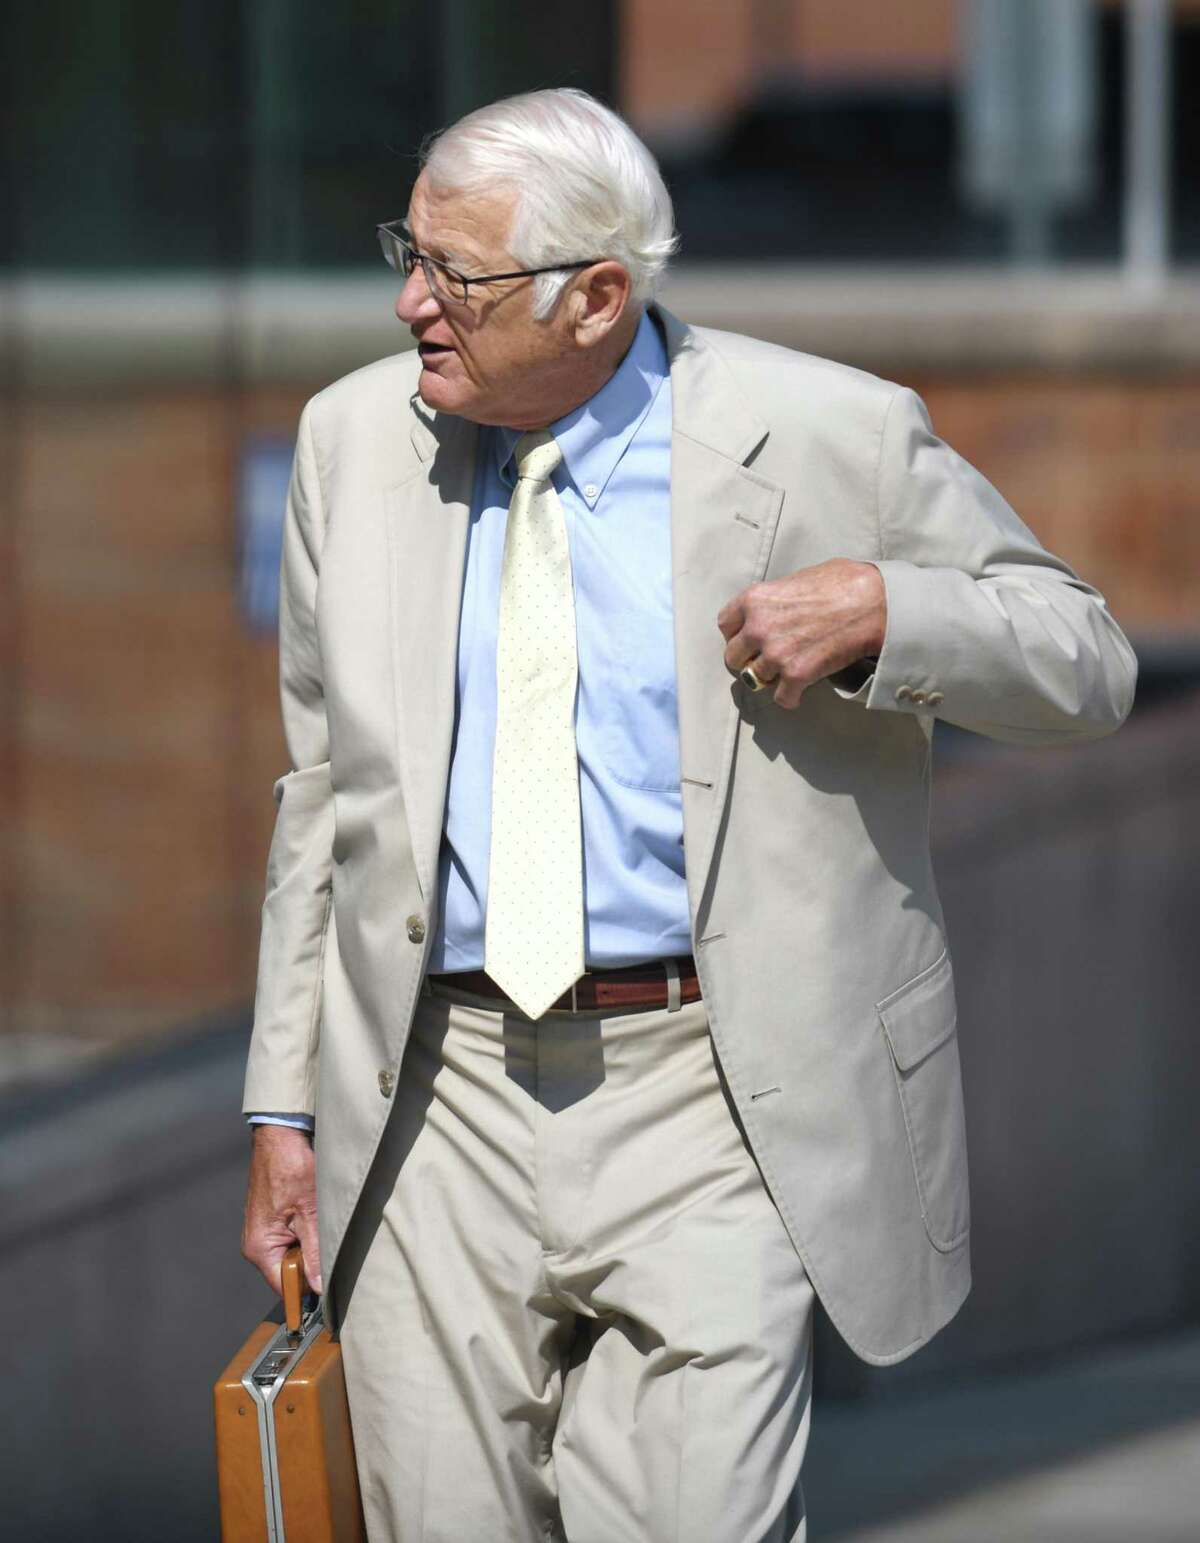 Former Greenwich town official Christopher von Keyserling walks into Connecticut Superior Court in Stamford, Conn. Thursday, July 15, 2021. A verdict was reached Thursday for a case in which von Keyserling was charged with misdemeanor fourth-degree sexual assault for allegedly groping a woman at the Nathaniel Witherell nursing and rehabilitation center in 2016.